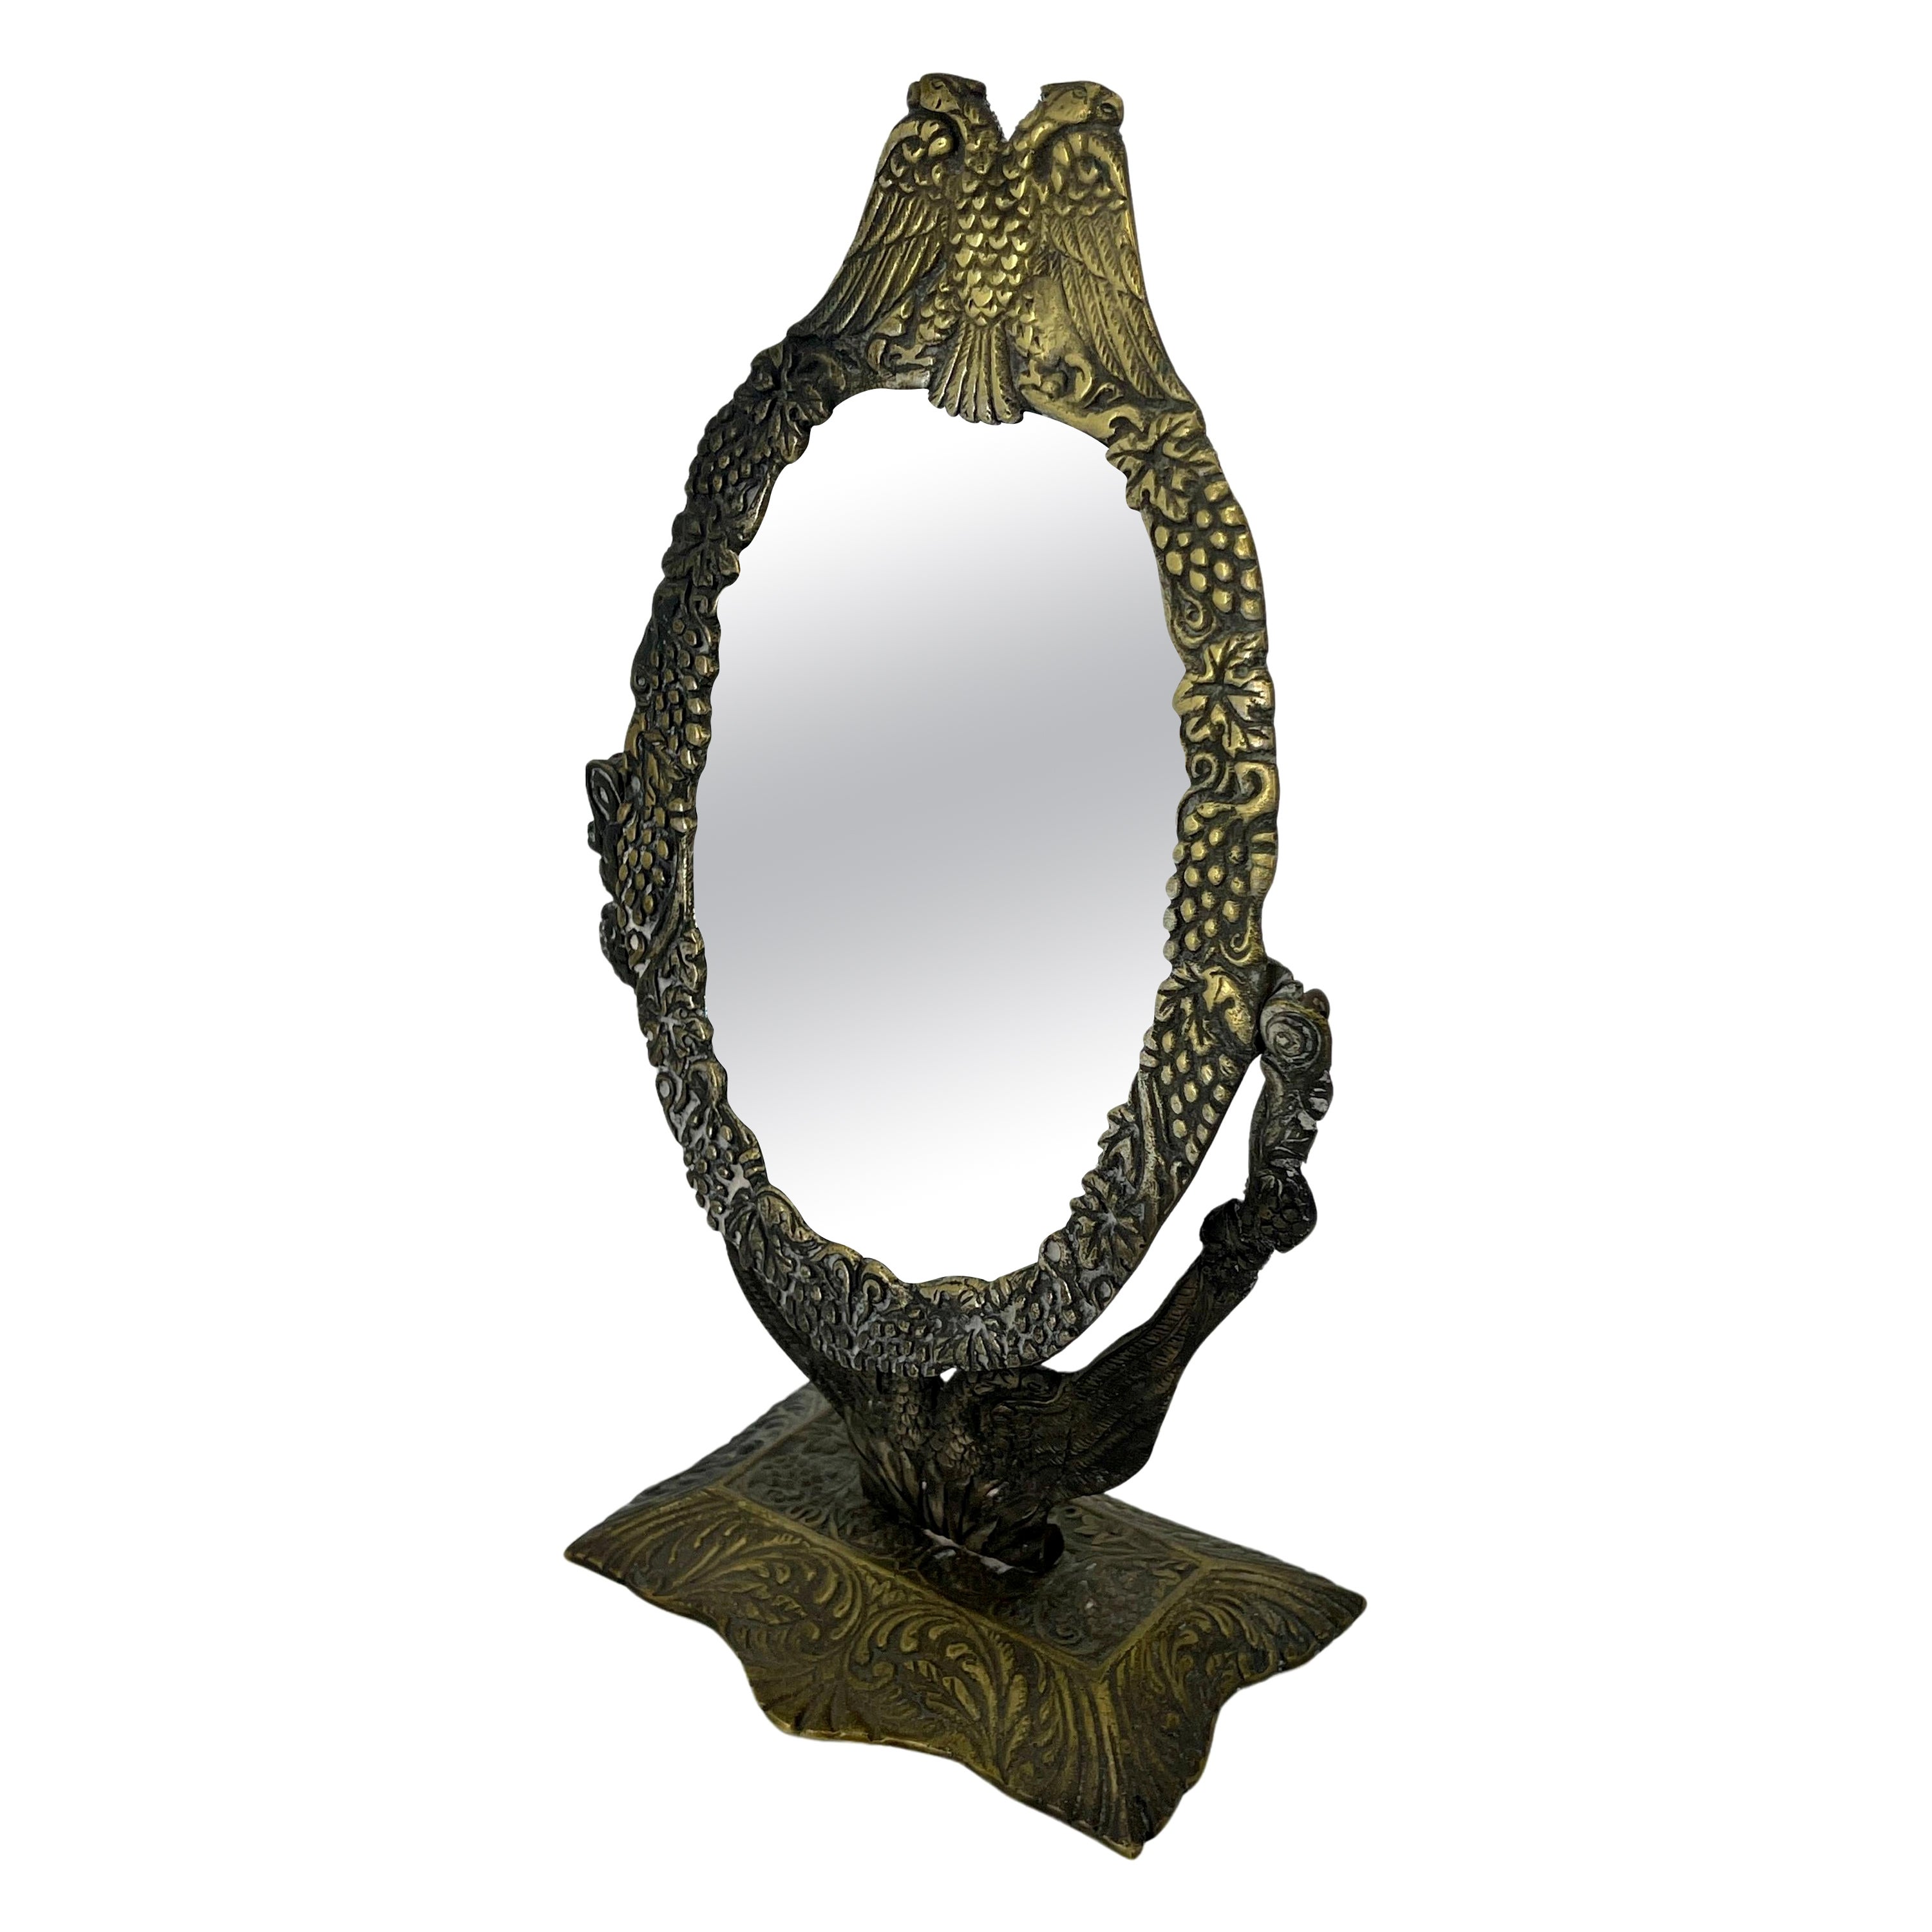 Small Art Deco Vanity Table Mirror with Double Eagle Decor For Sale